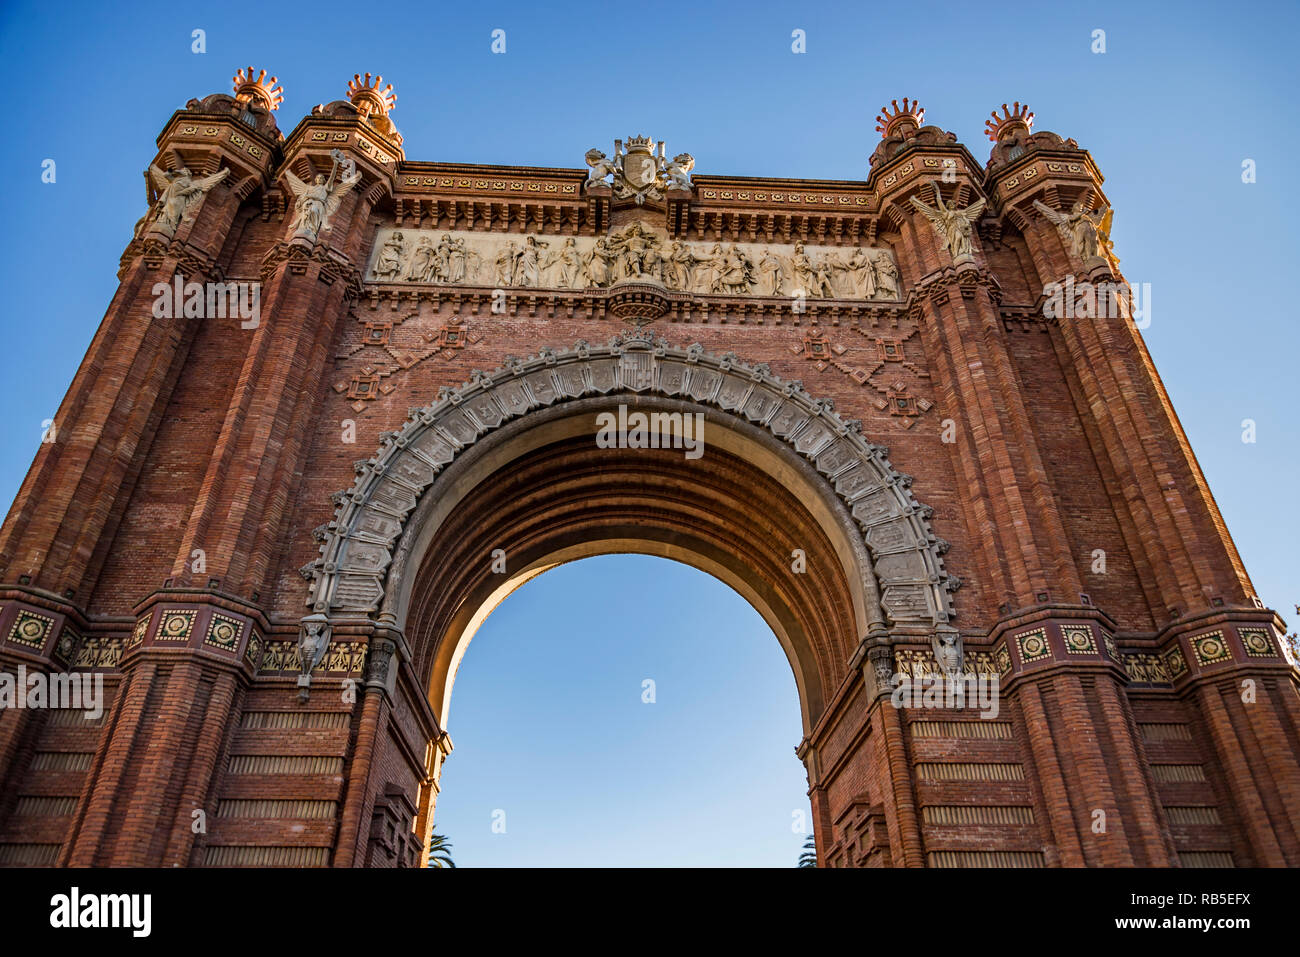 The Arc de Triomf, one of the most famous landmark in Barcelona, Spain. Stock Photo